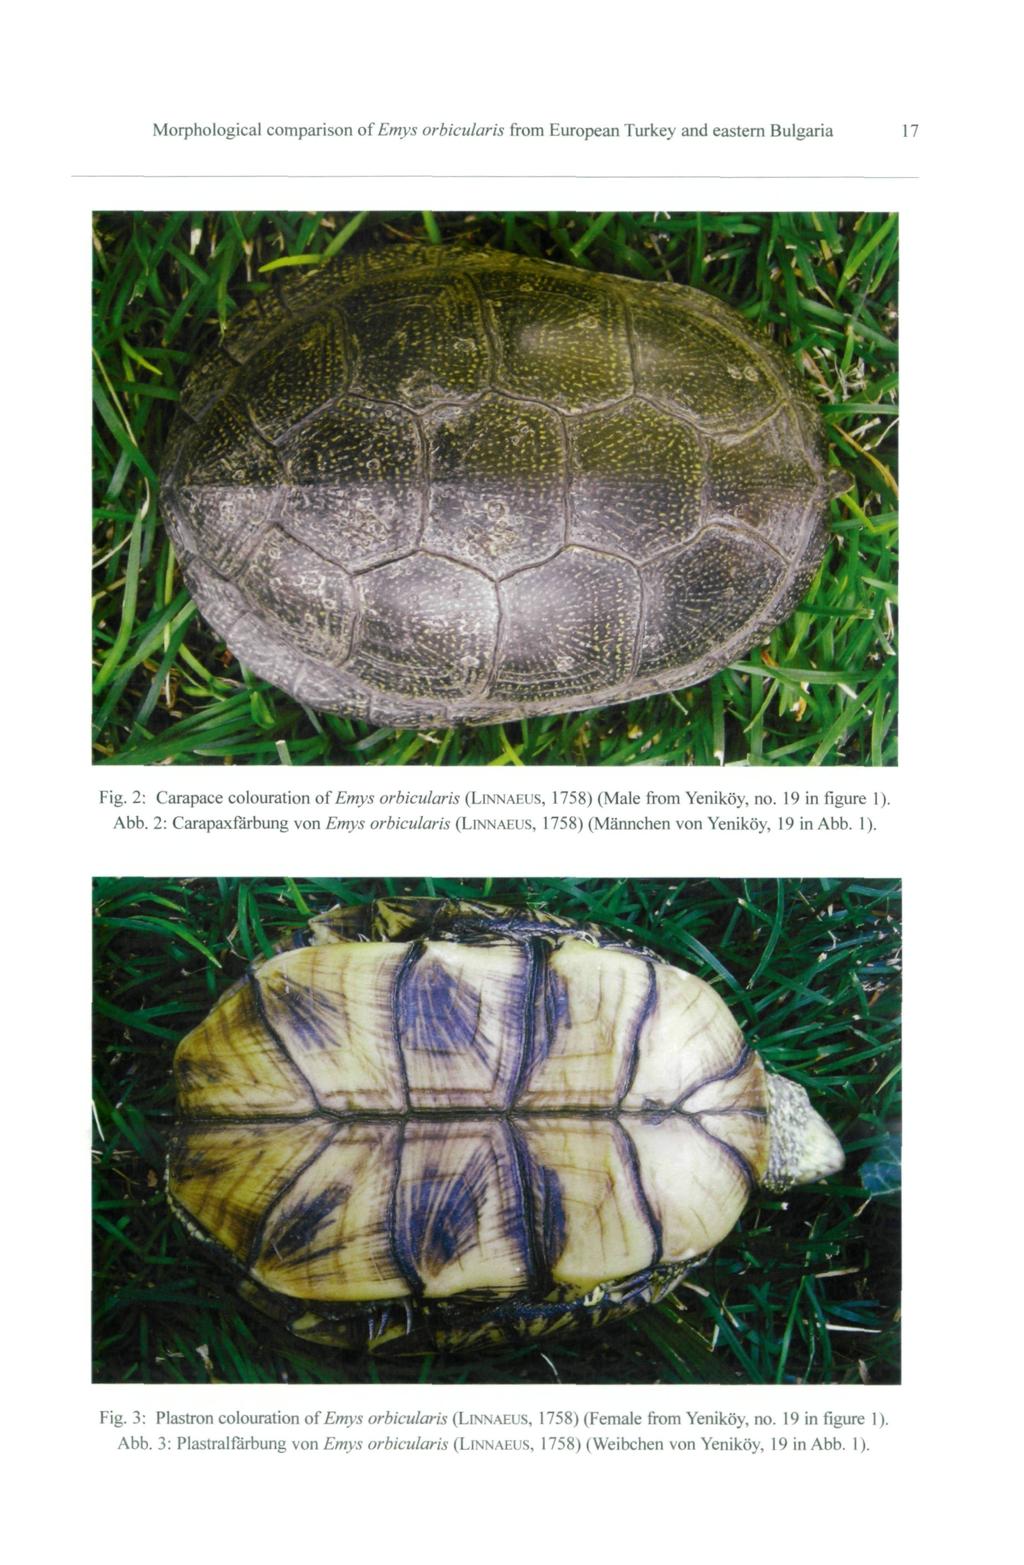 Morphological comparison of Emys orbicularis from European Turkey and eastern Bulgaria 17 Fig. 2: Carapace colouration of Emys orbicularis (LINNAEUS, 1758) (Male from Yeniköy, no. 19 in figure 1).